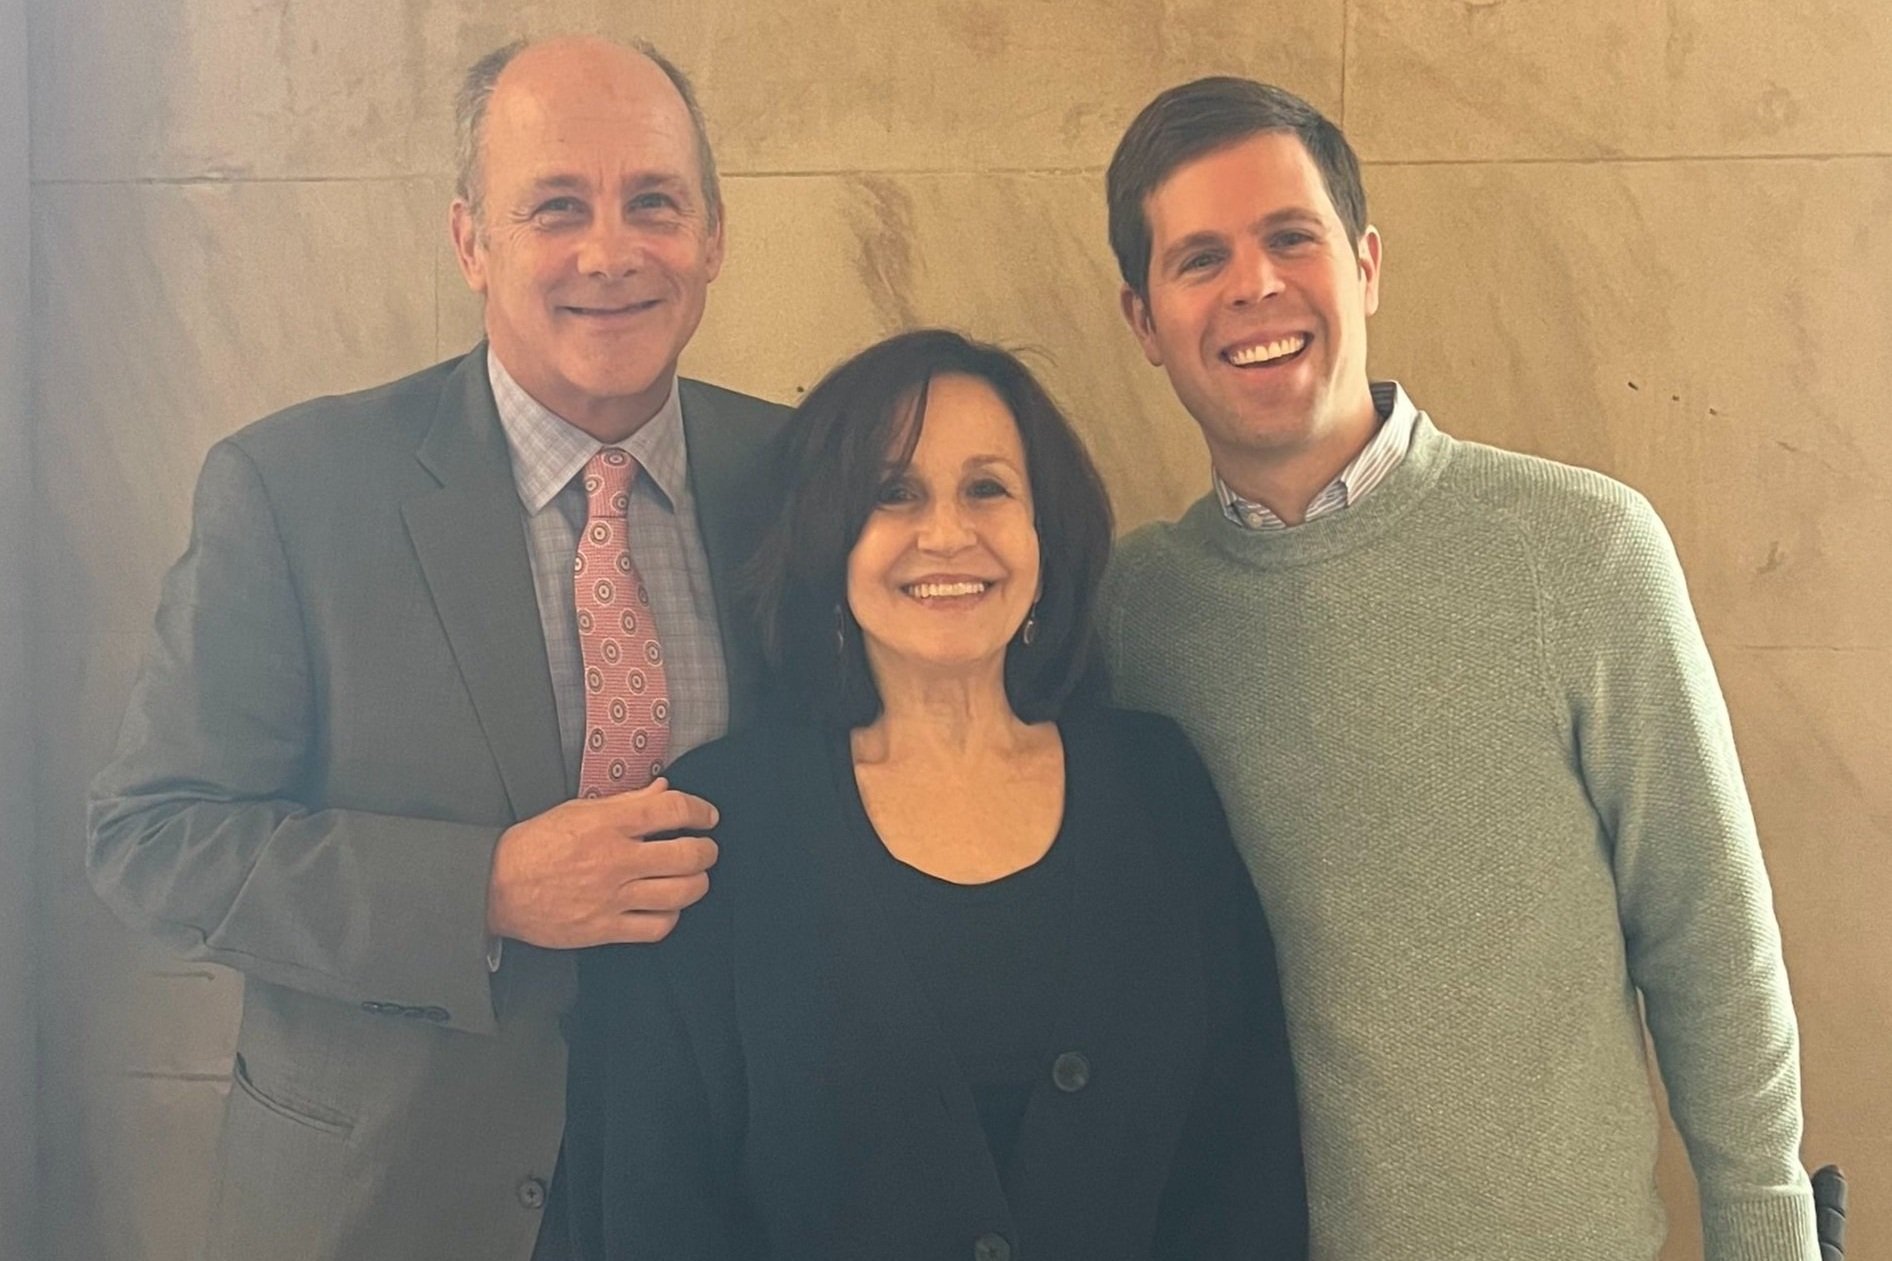 PAVe's Cynthia Stremba is joined by Brown Strategy's Josh Brown TFK's Kevin O'Flaherty at a NY Press Conference & Lobby Day in Albany, NY in March 2024